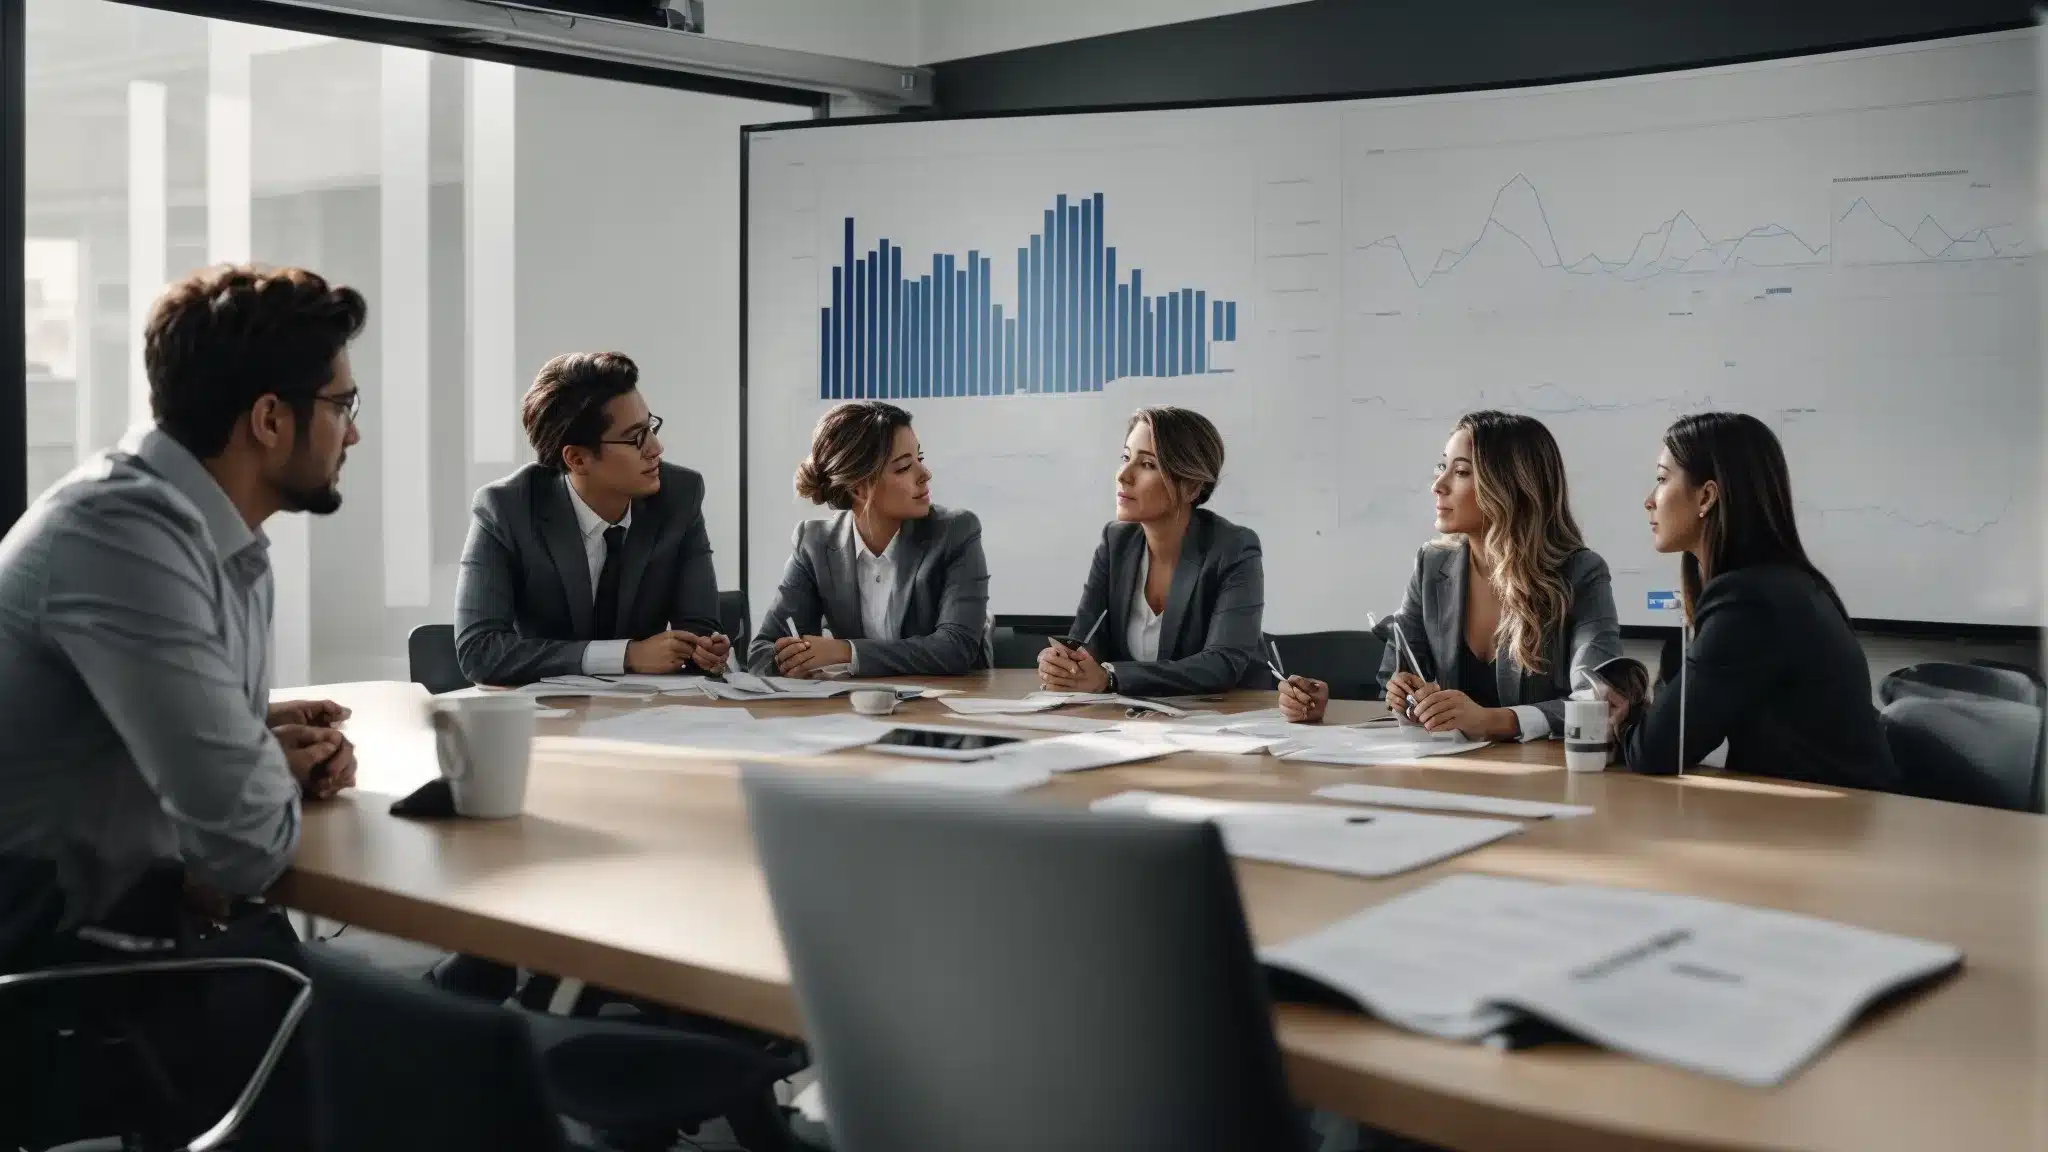 A Team Of Professionals Gathered Around A Conference Table, Discussing Over A Digital Marketing Plan Depicted Through Charts And Diagrams On A Whiteboard.